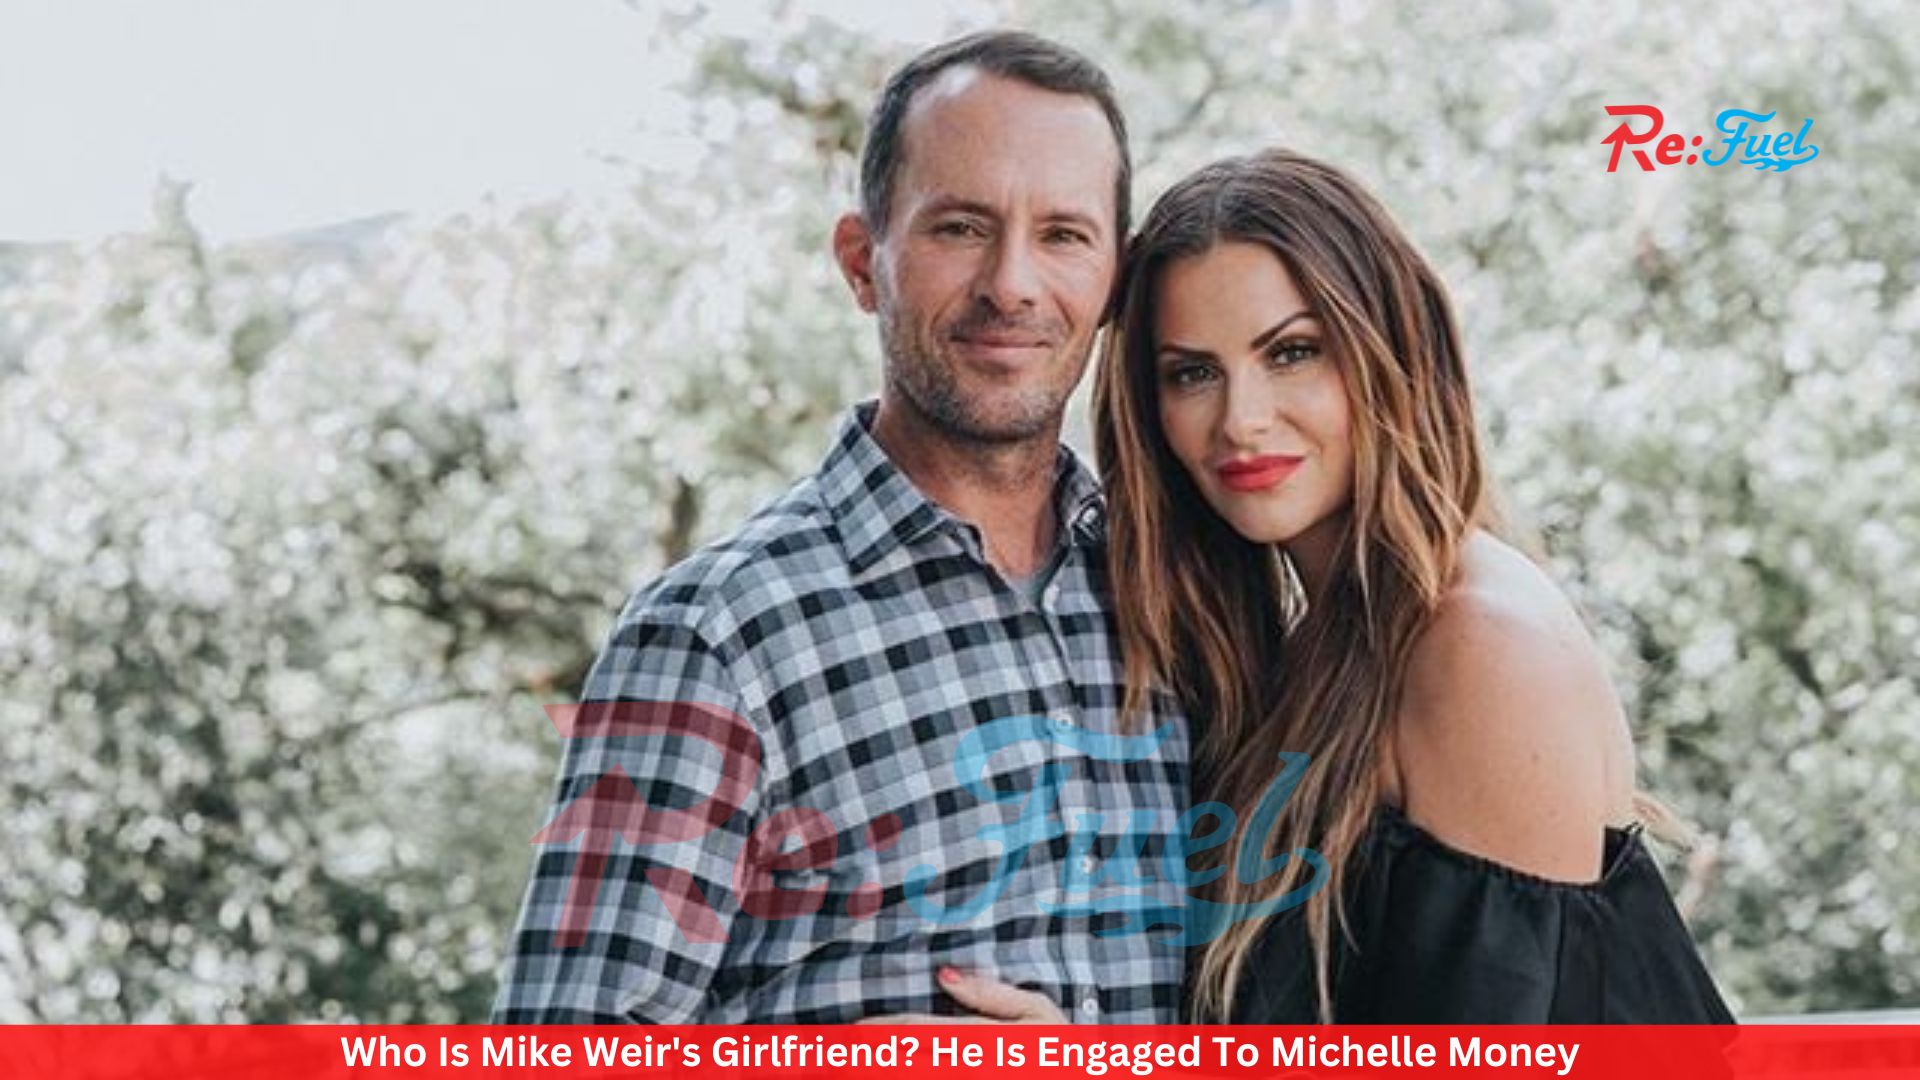 Who Is Mike Weir's Girlfriend? He Is Engaged To Michelle Money